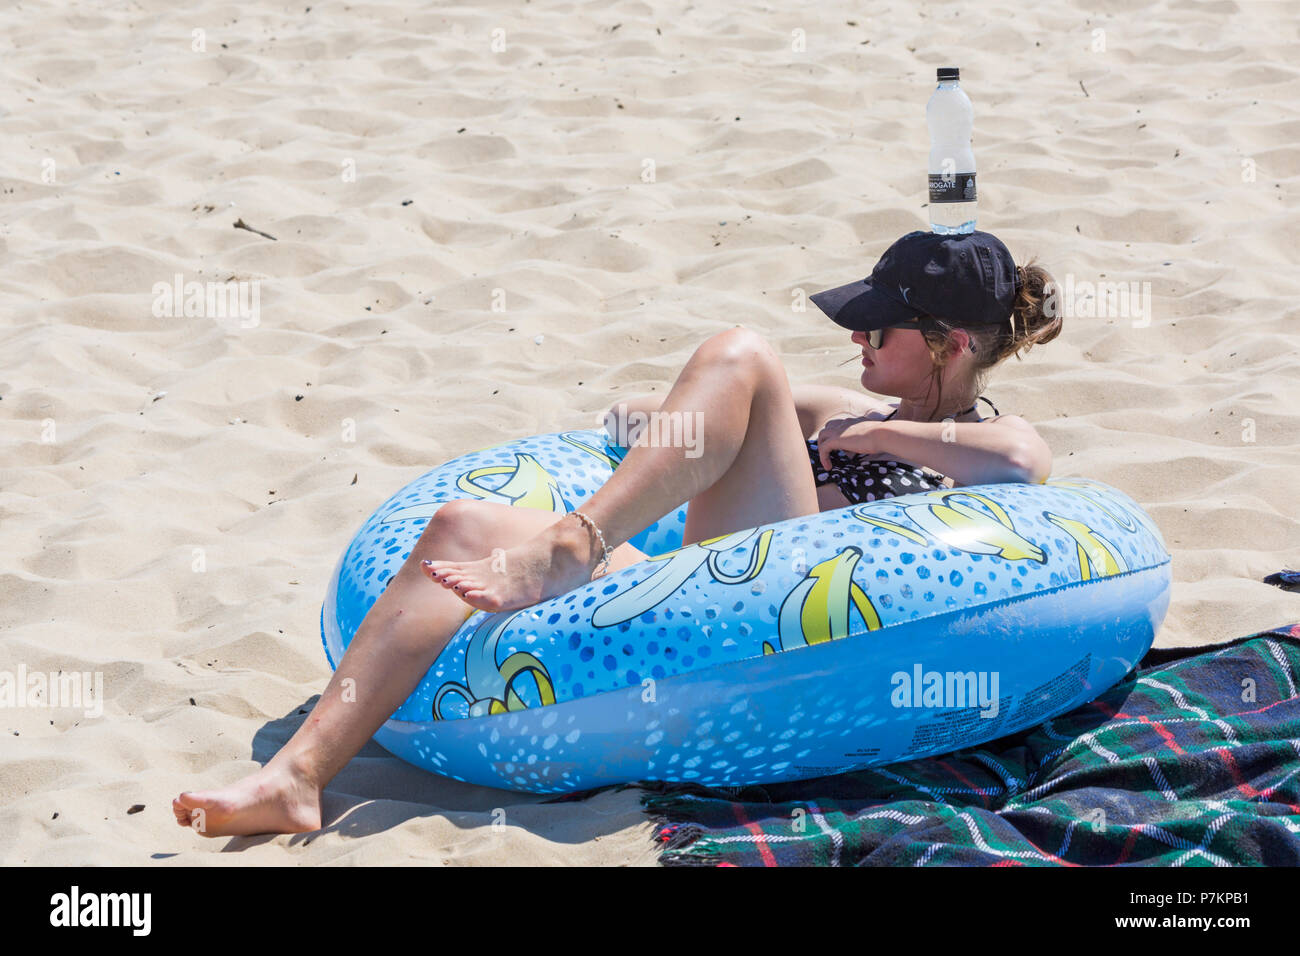 Bournemouth, Dorset, UK. 7th July 2018. UK weather: another hot sunny day as the heatwave continues and thousands of sunseekers head to the seaside with temperatures rising to enjoy the sandy beaches at Bournemouth on the South Coast even with the big match on! Keeping a bottle of water handy! Young woman relaxing sunbathing in inflatable ring donut with bottle of water on her head. Credit: Carolyn Jenkins/Alamy Live News Credit: Carolyn Jenkins/Alamy Live News Credit: Carolyn Jenkins/Alamy Live News Stock Photo